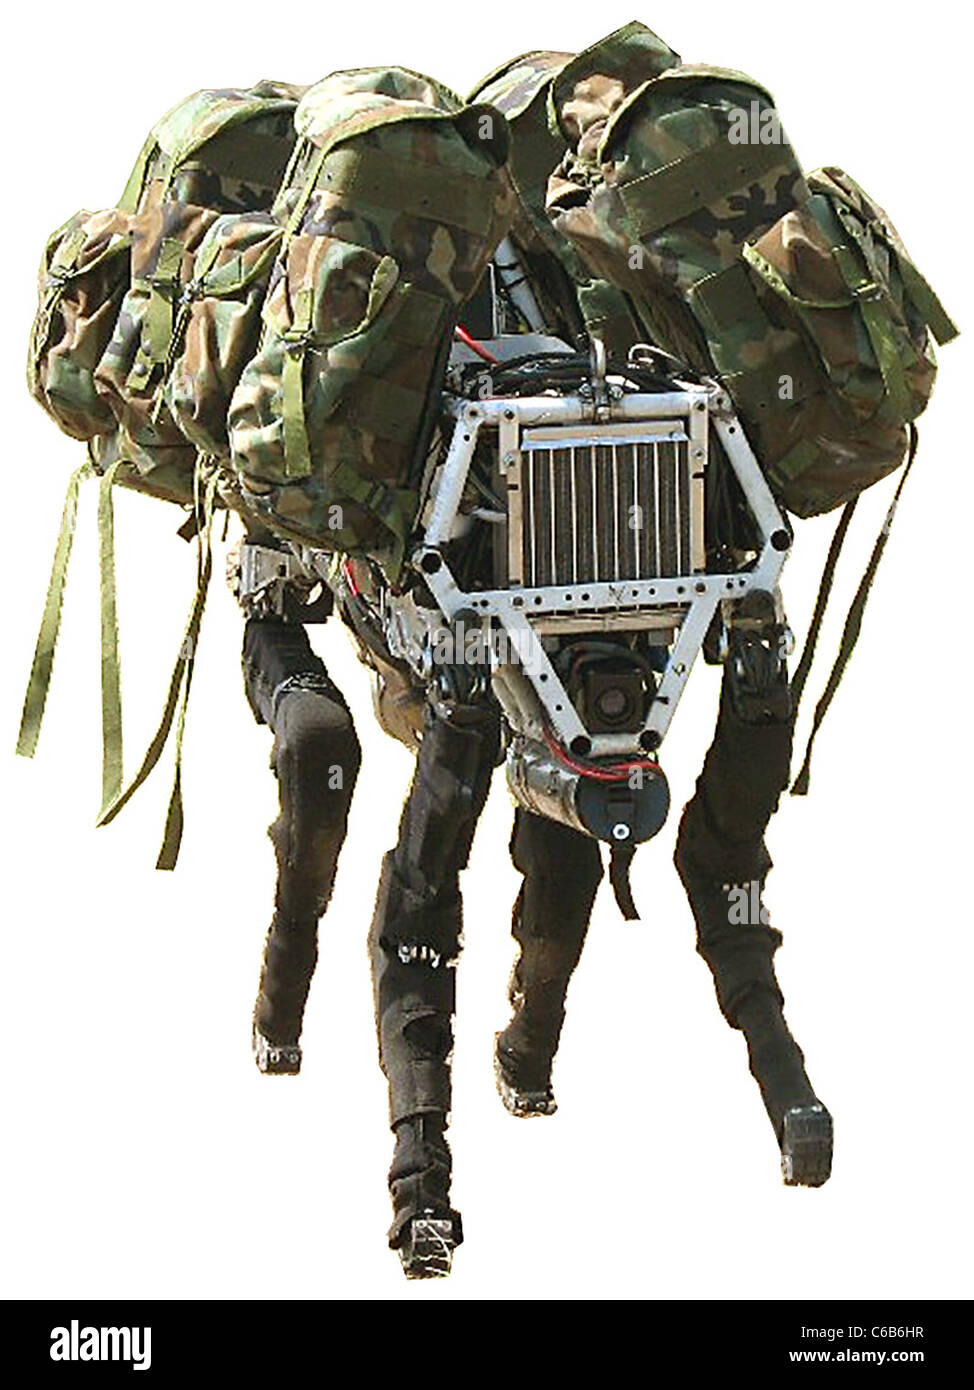 The New BigDog on the Block Boston Dynamics, makers of the BigDog robot, have won a $32 million (Â£20 million) contract from Stock Photo